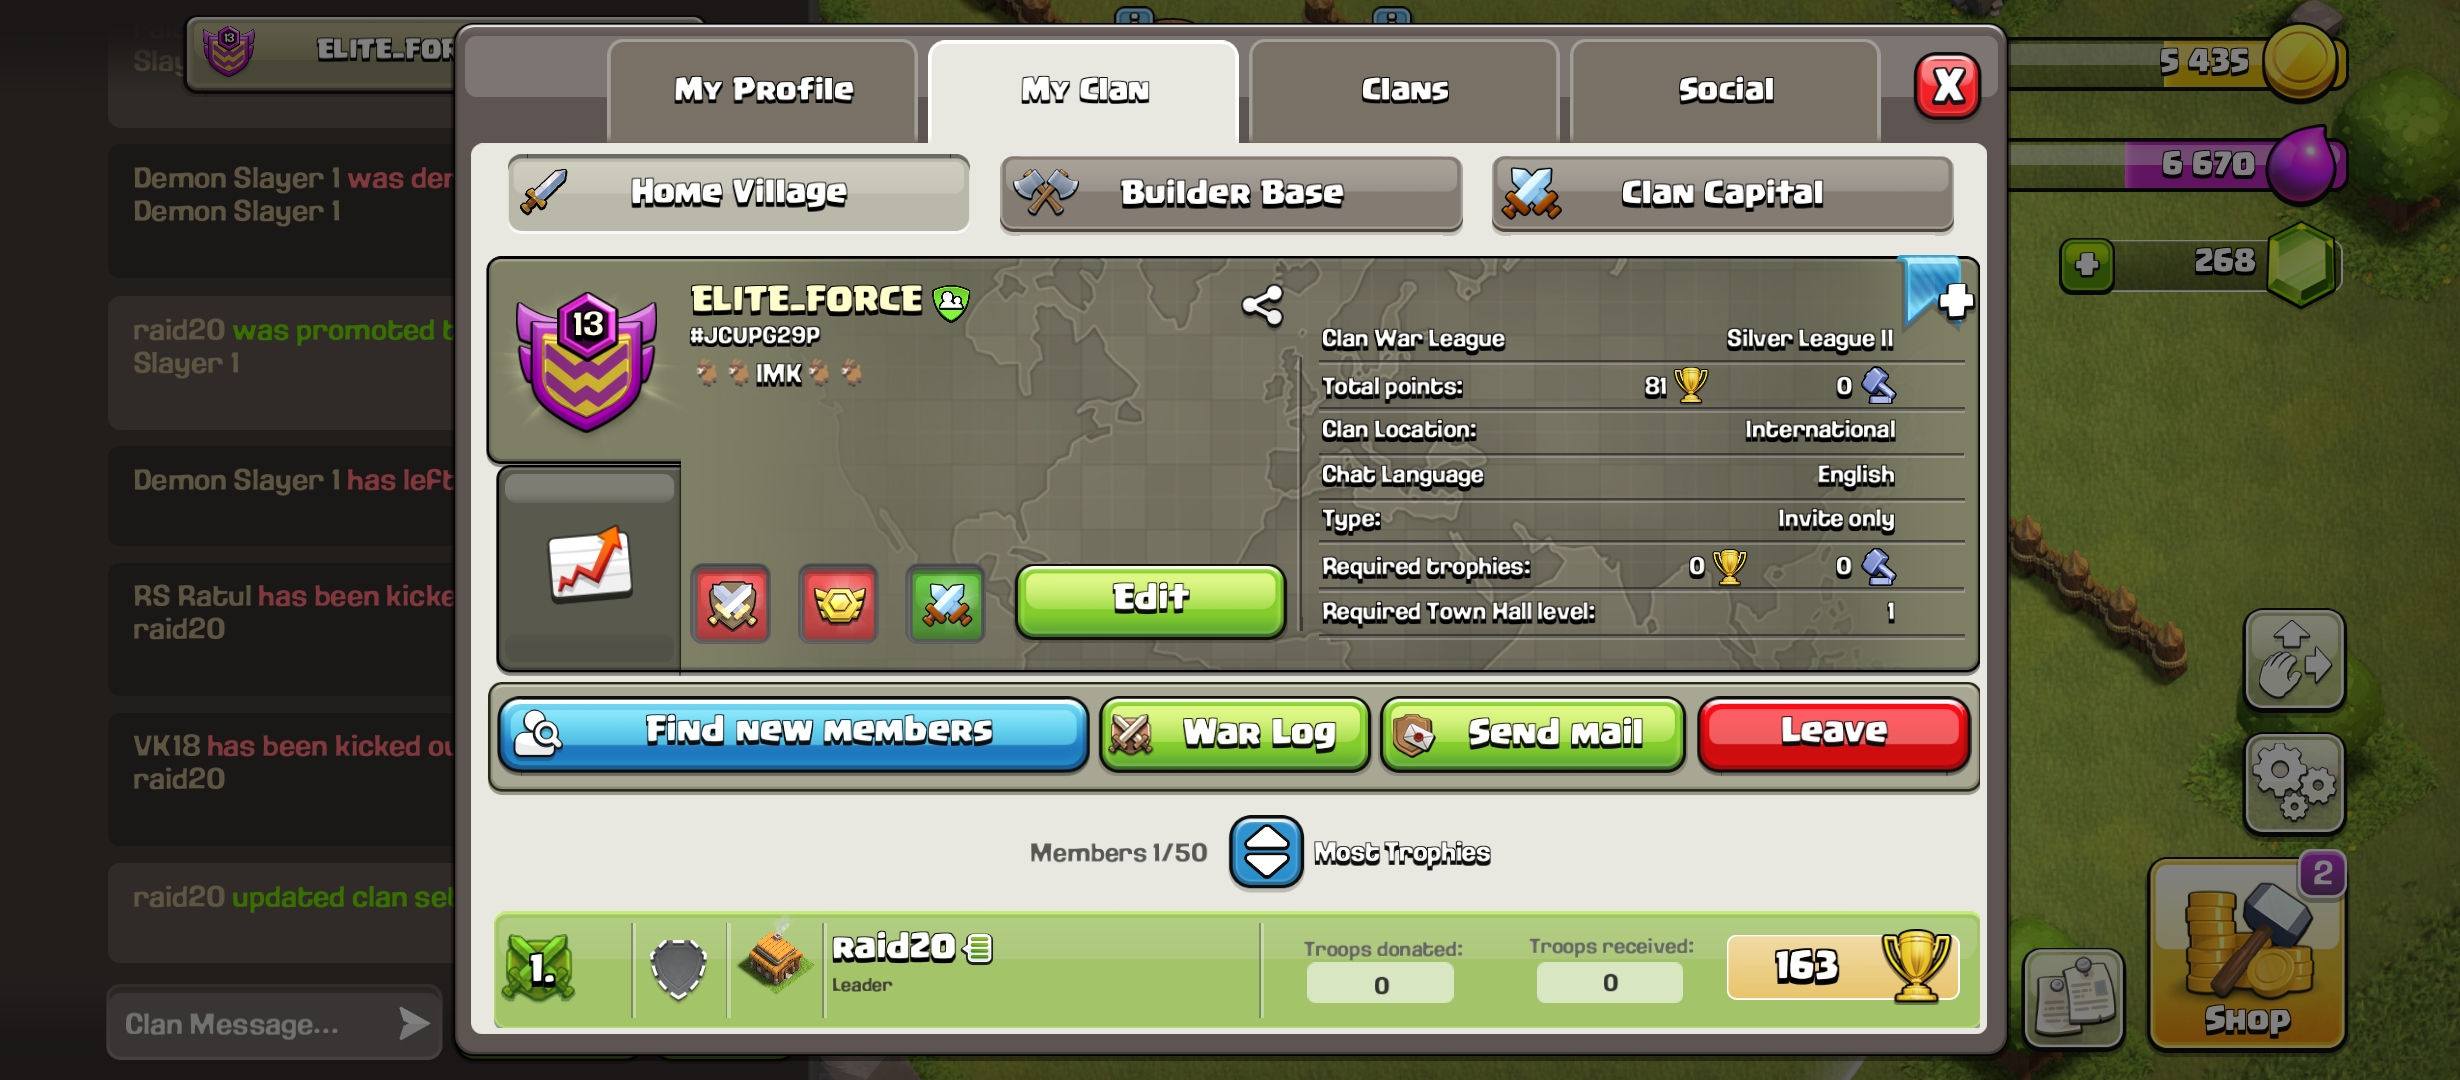 Clan Level 13 | Name : ELITE_FORCE | W 151 , L 267  | Capital Hall 1 |  League : Silver 2